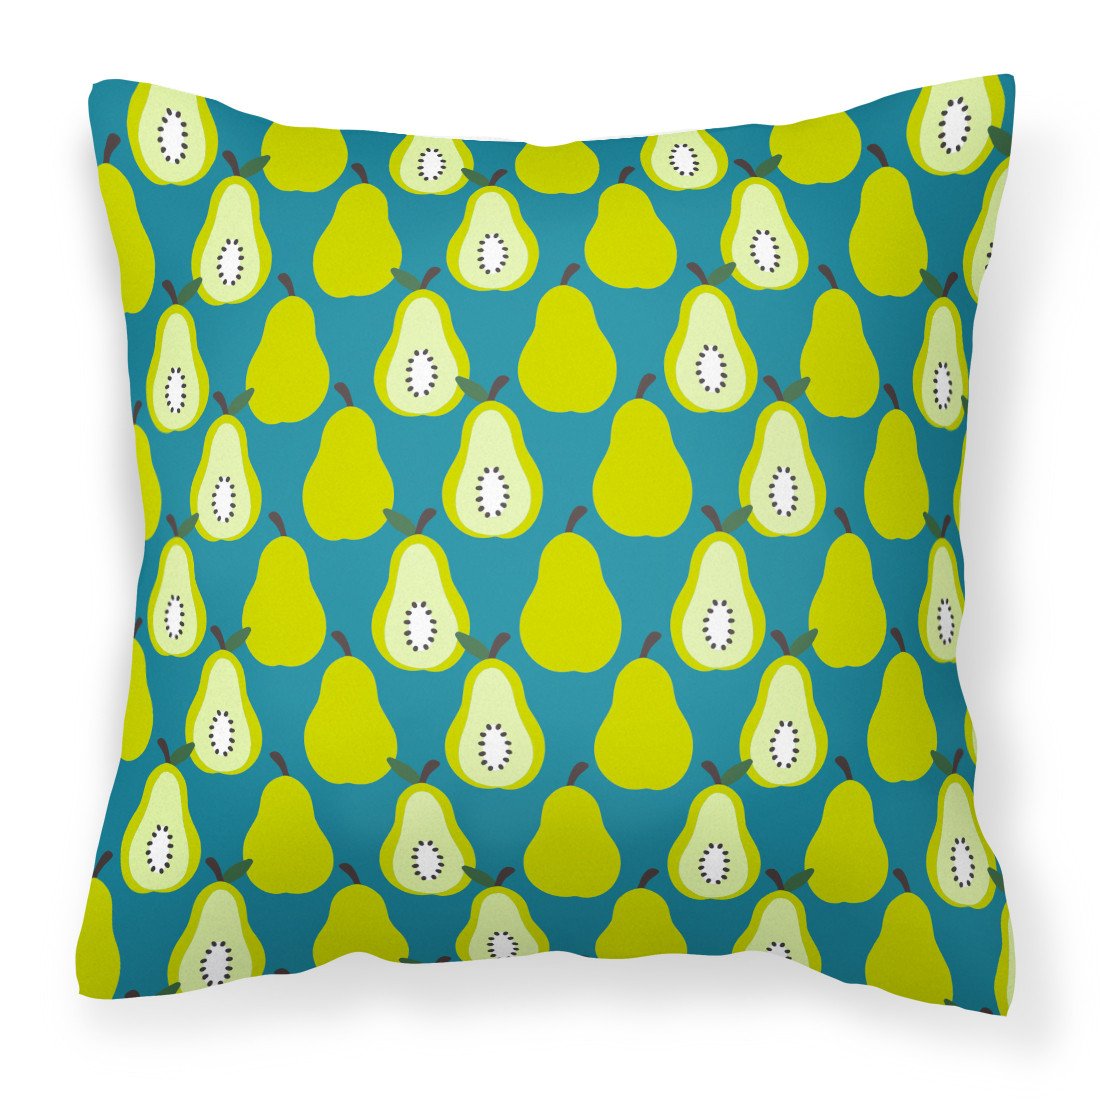 Pears on Green Fabric Decorative Pillow BB5138PW1818 by Caroline's Treasures